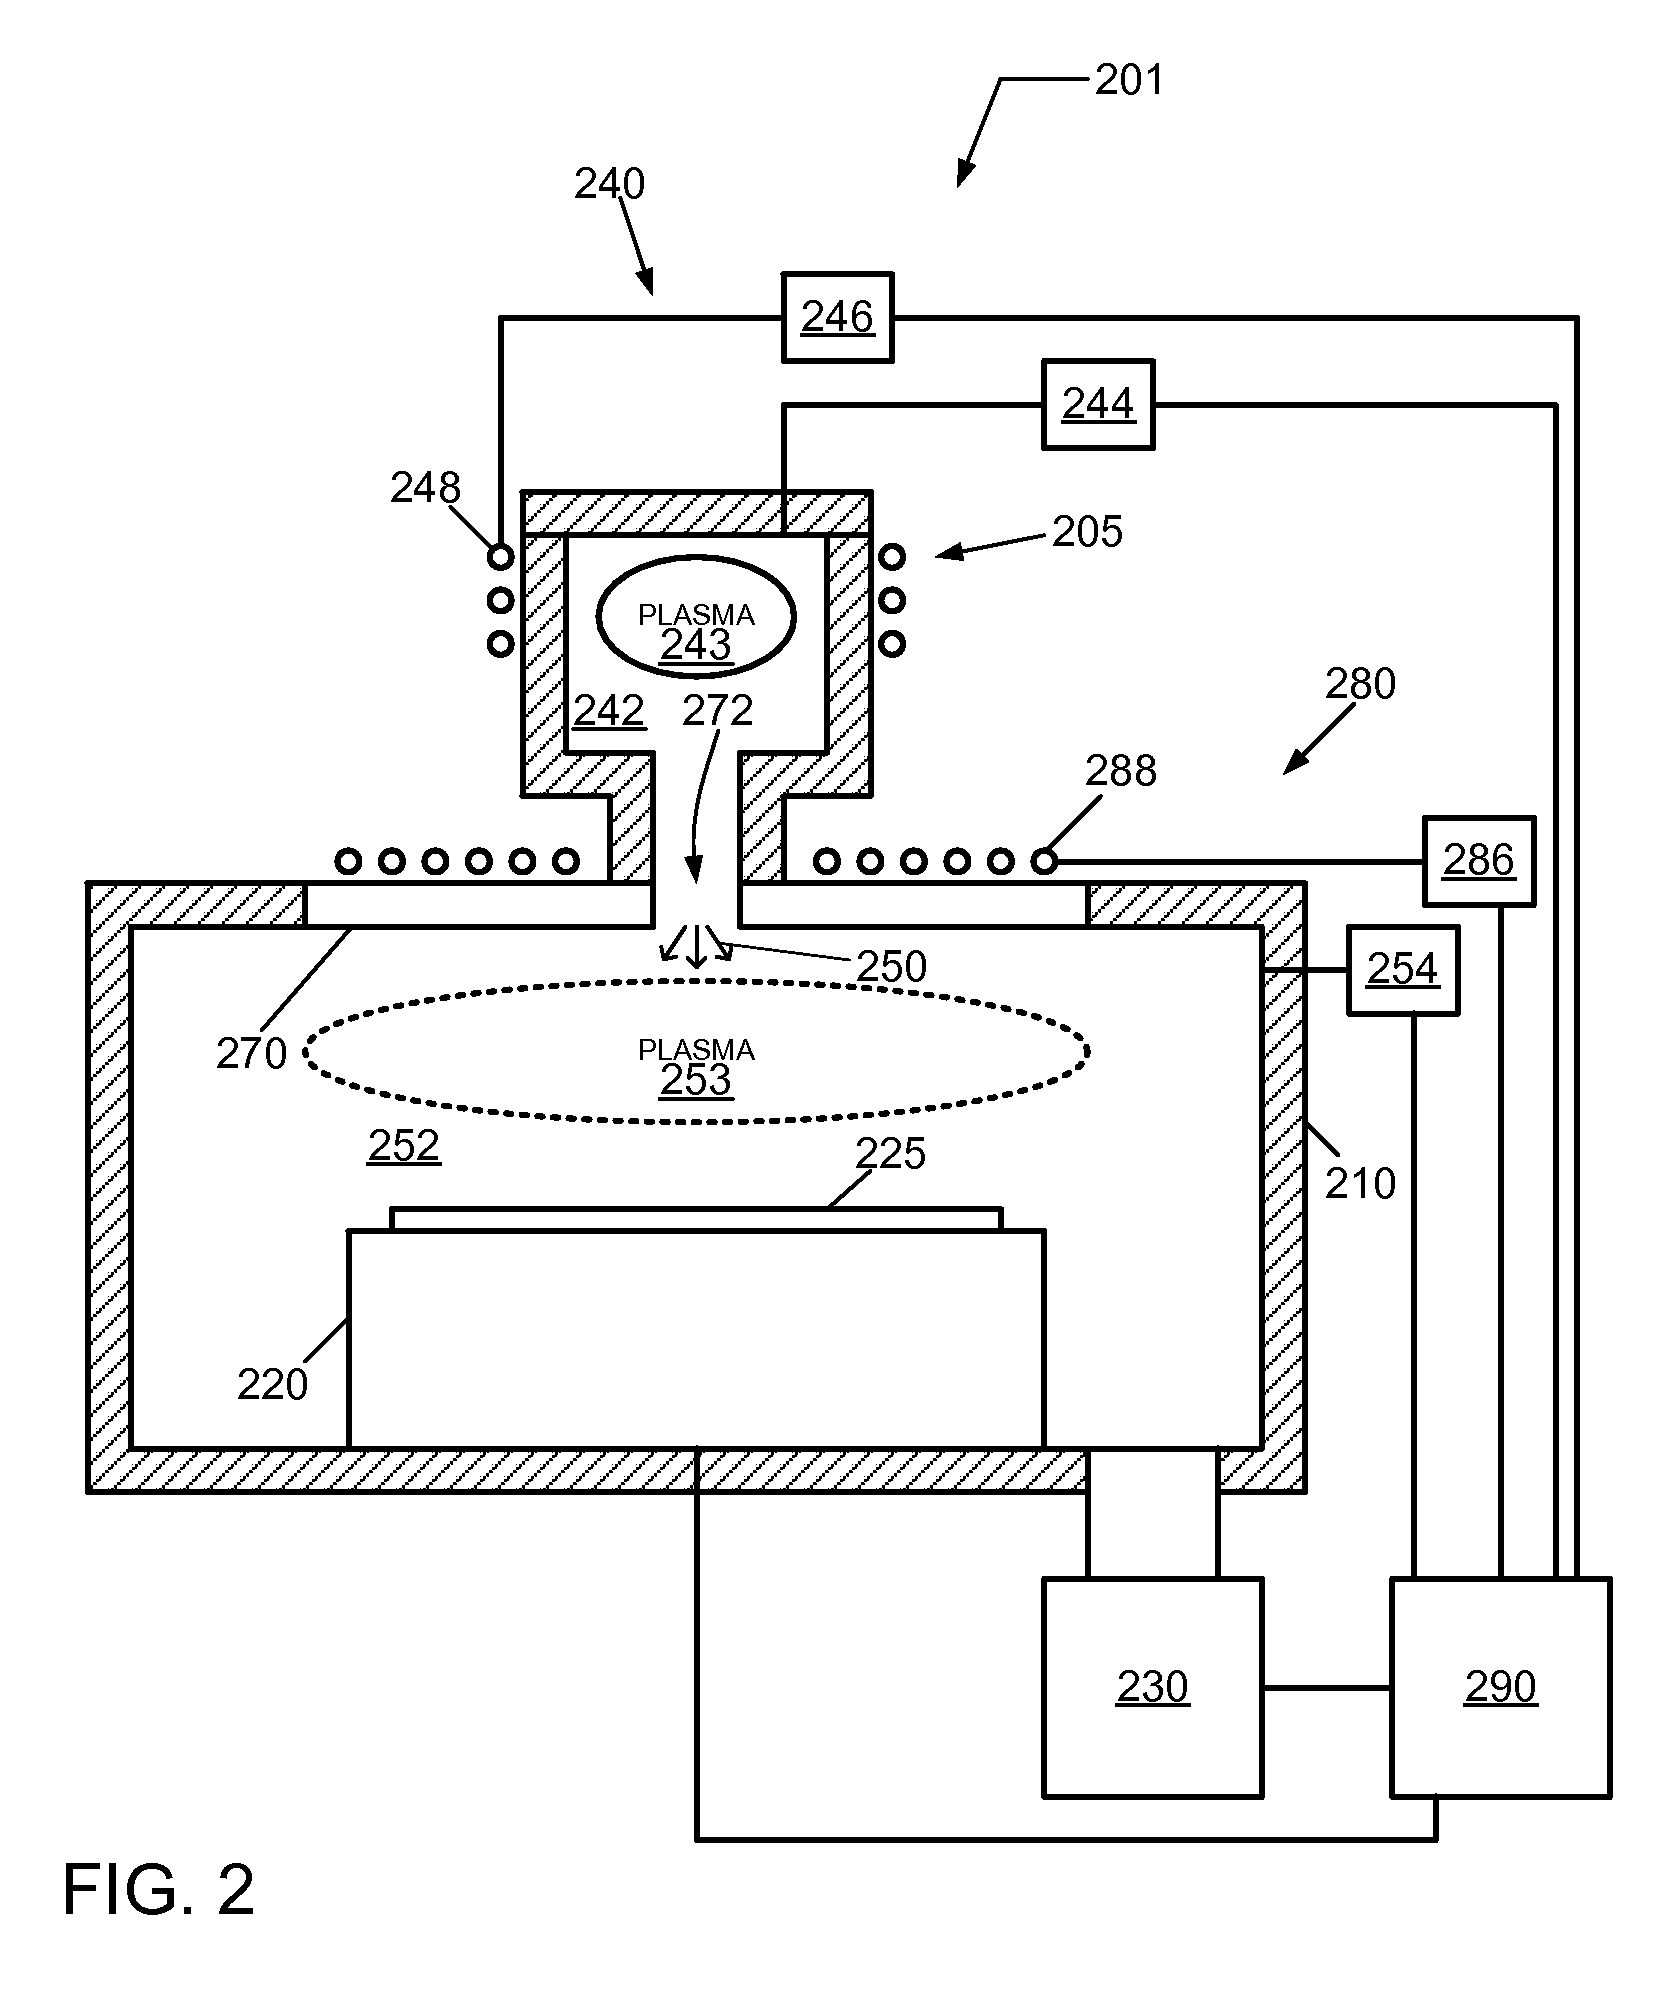 Method and system for low pressure plasma processing